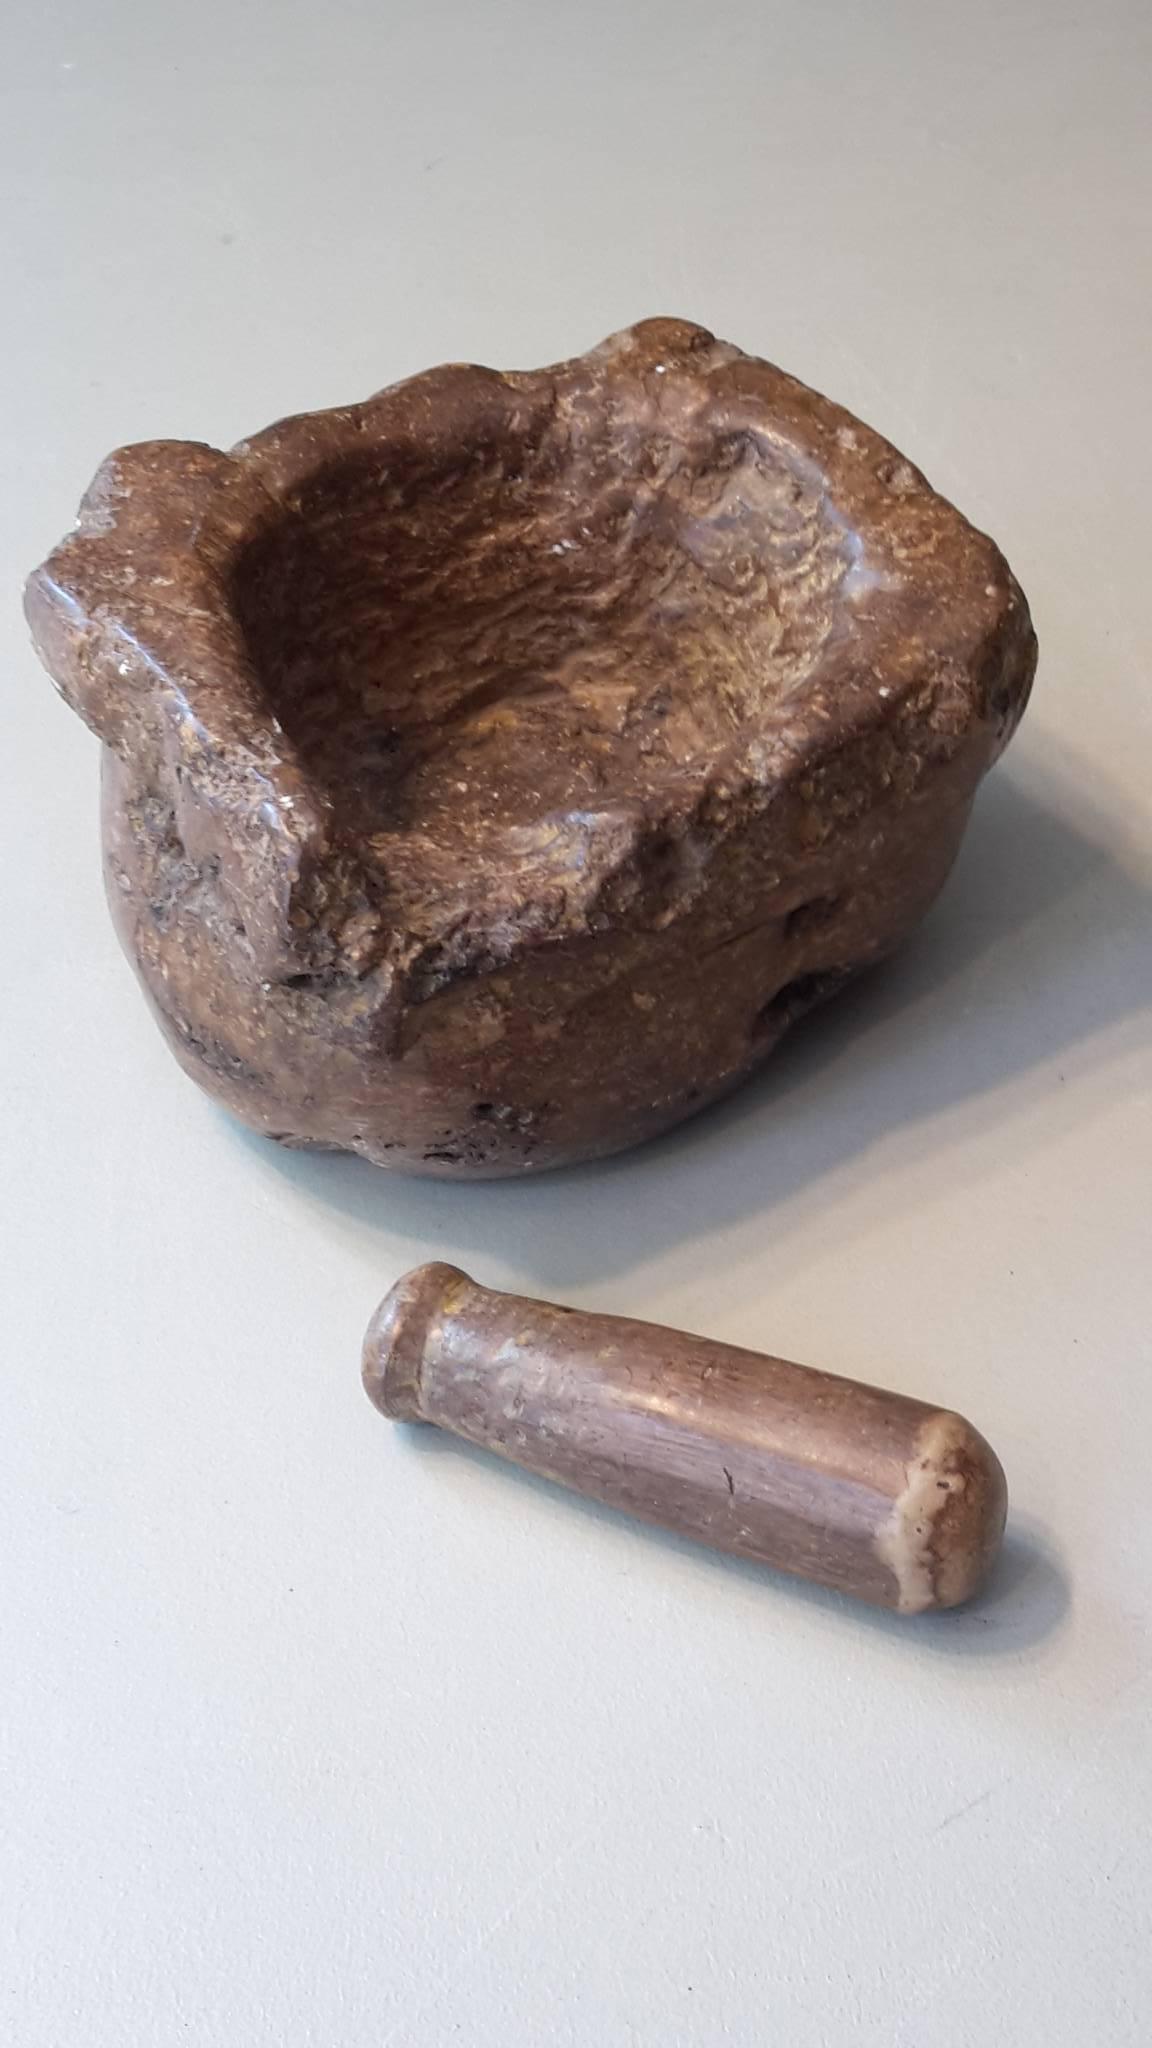 Early 20th century mortar and pestle made of stone.